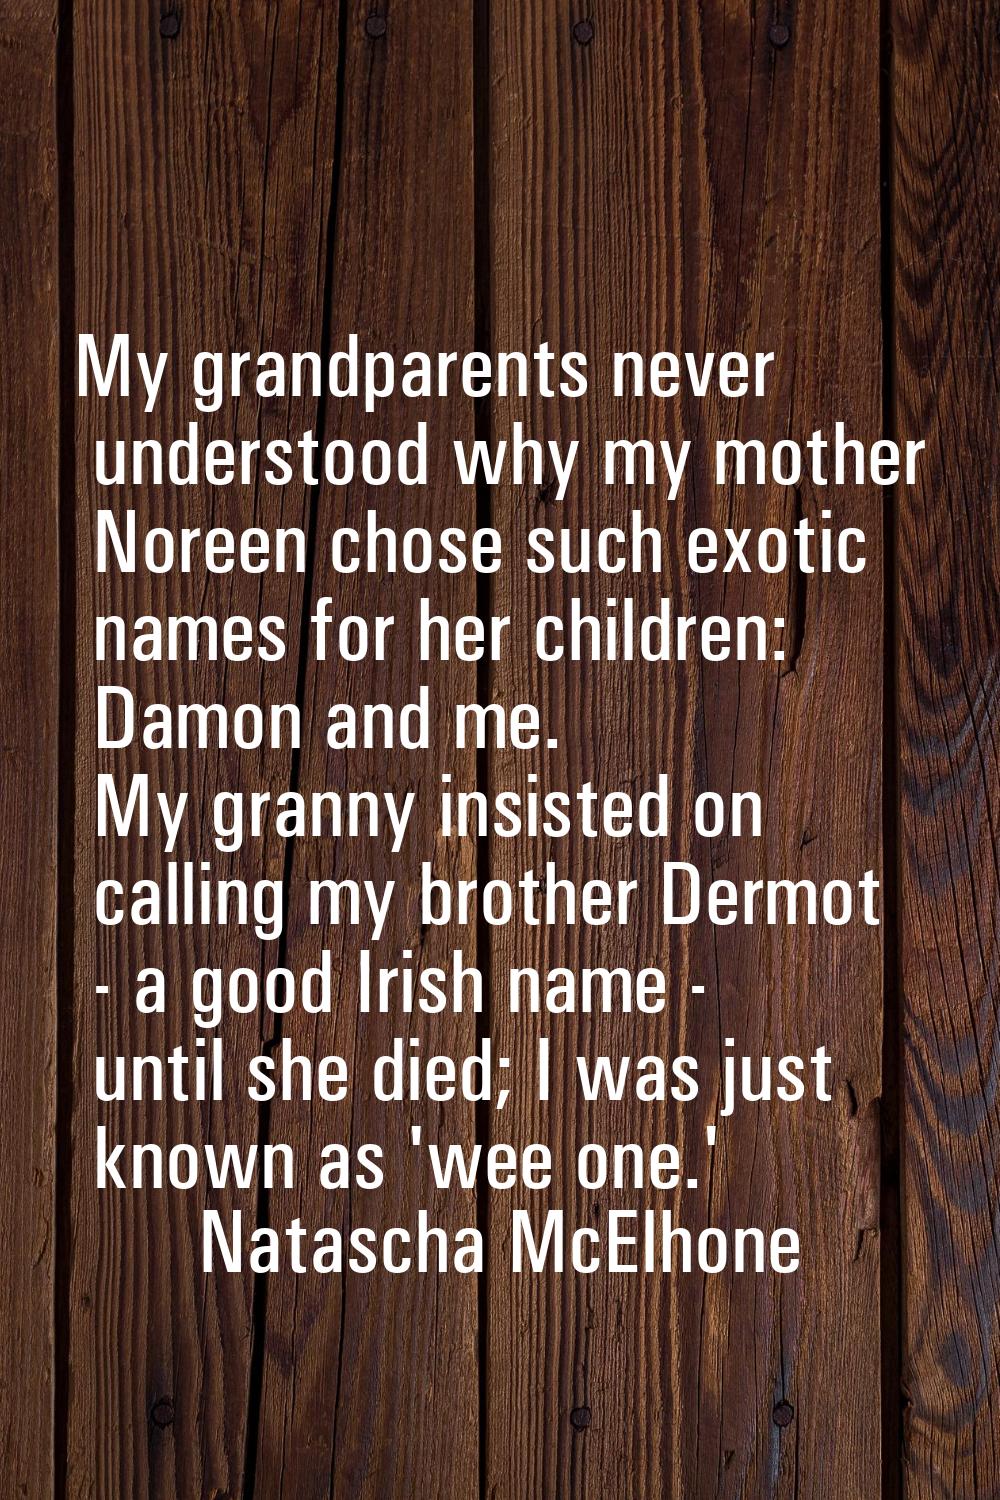 My grandparents never understood why my mother Noreen chose such exotic names for her children: Dam